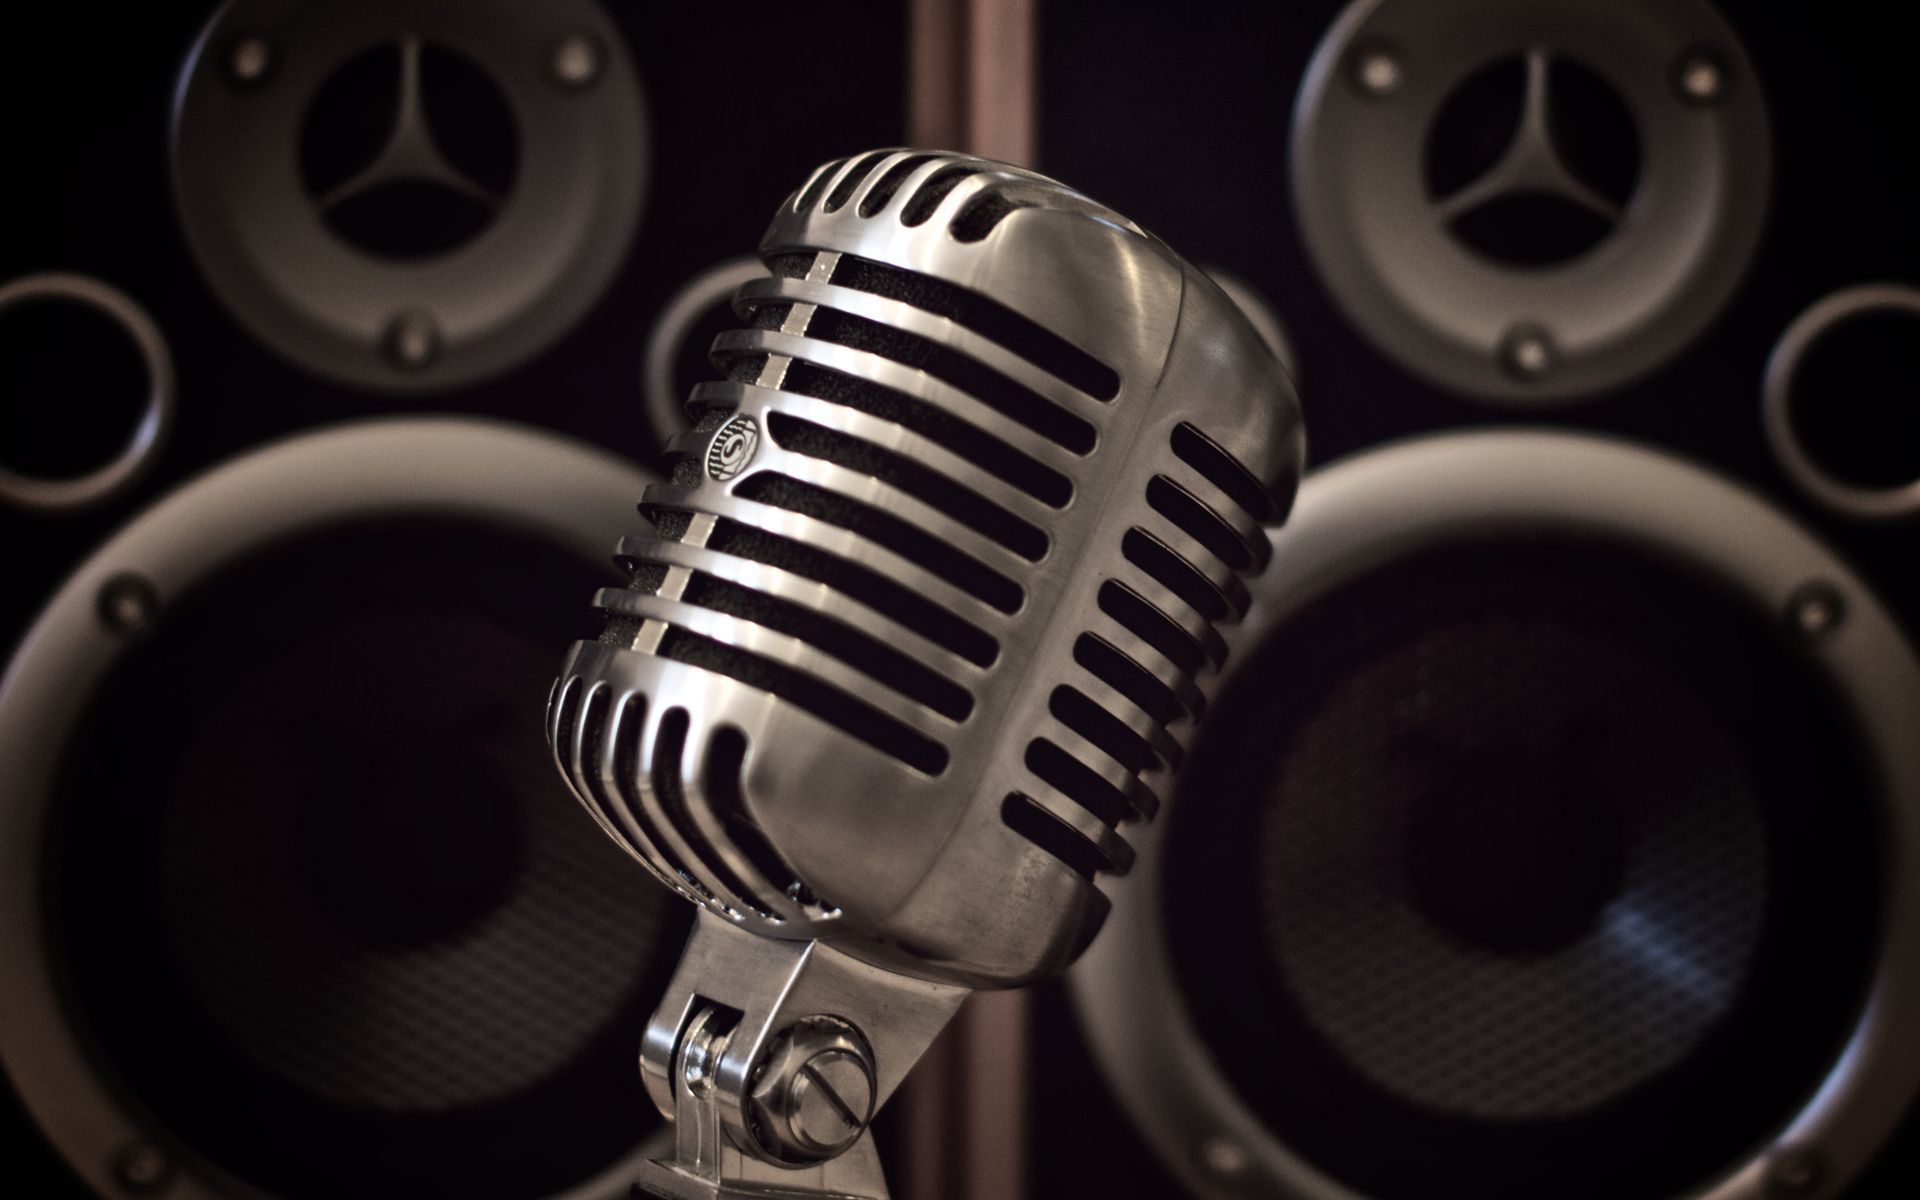 Microphone phone, desktop wallpaper, picture, photo, bckground